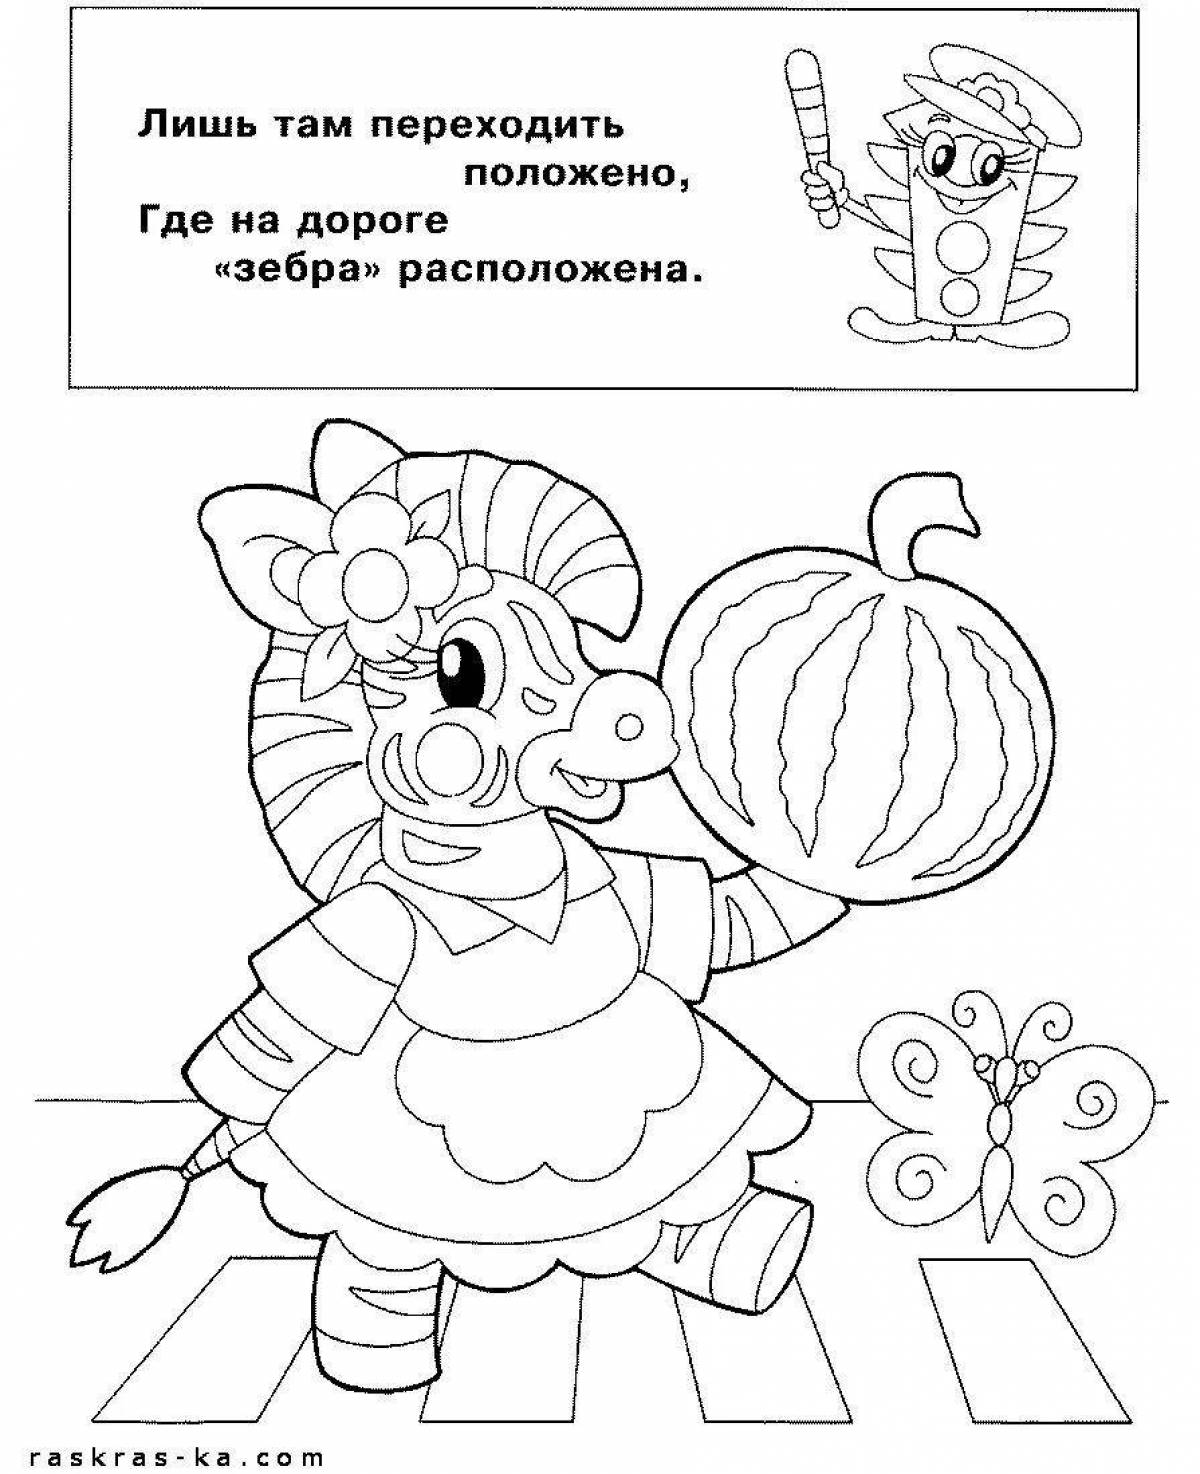 Adorable rules of the road coloring book for kids